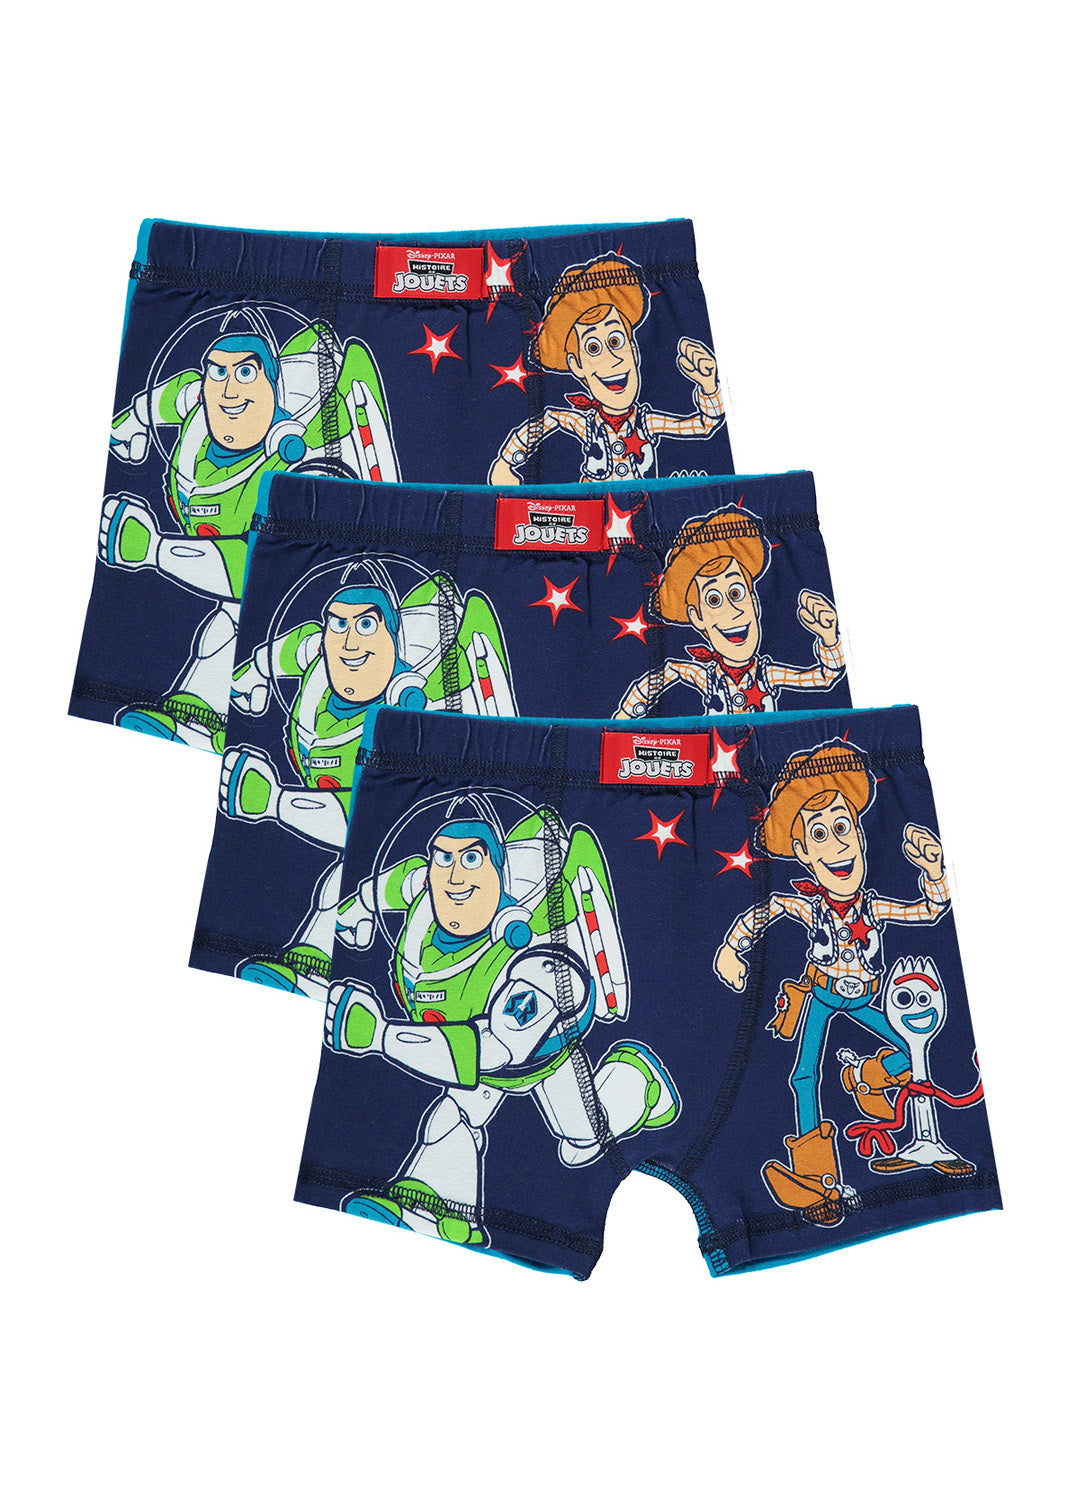 3 Boys Boxers with Toy Story 4 print